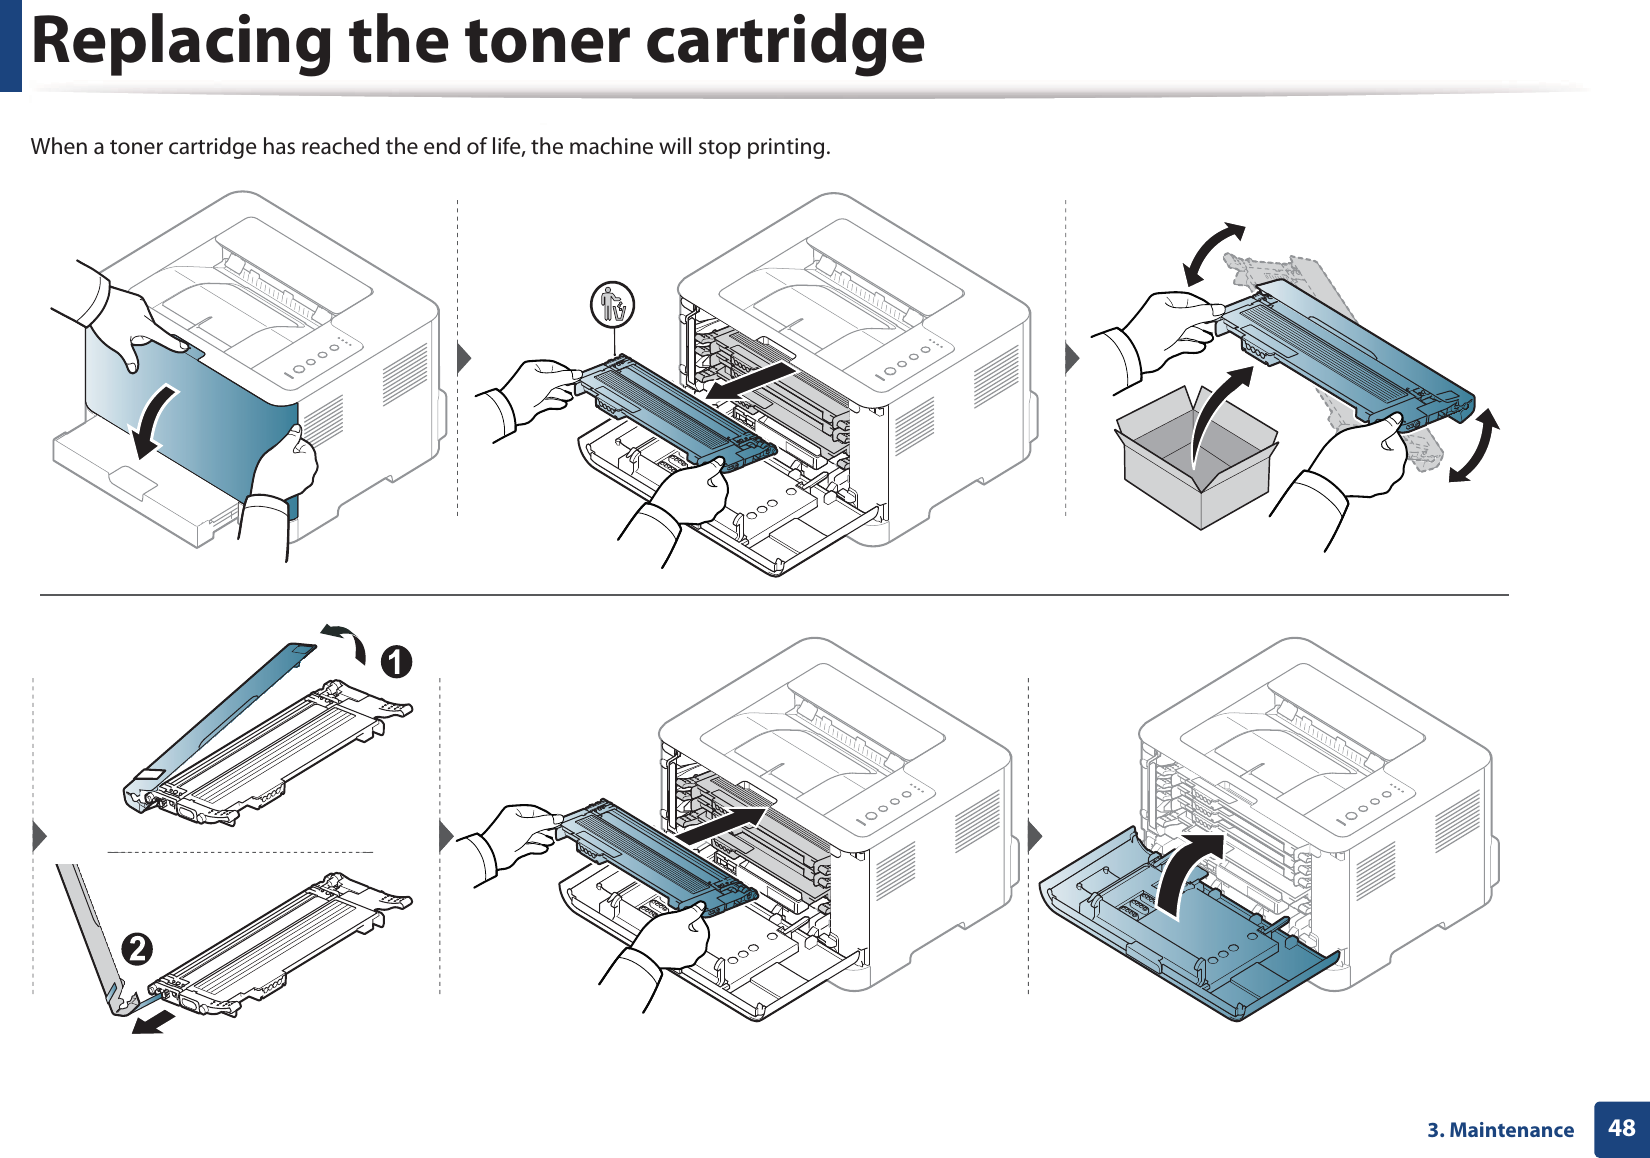 Replacing the toner cartridge483. MaintenanceWhen a toner cartridge has reached the end of life, the machine will stop printing.